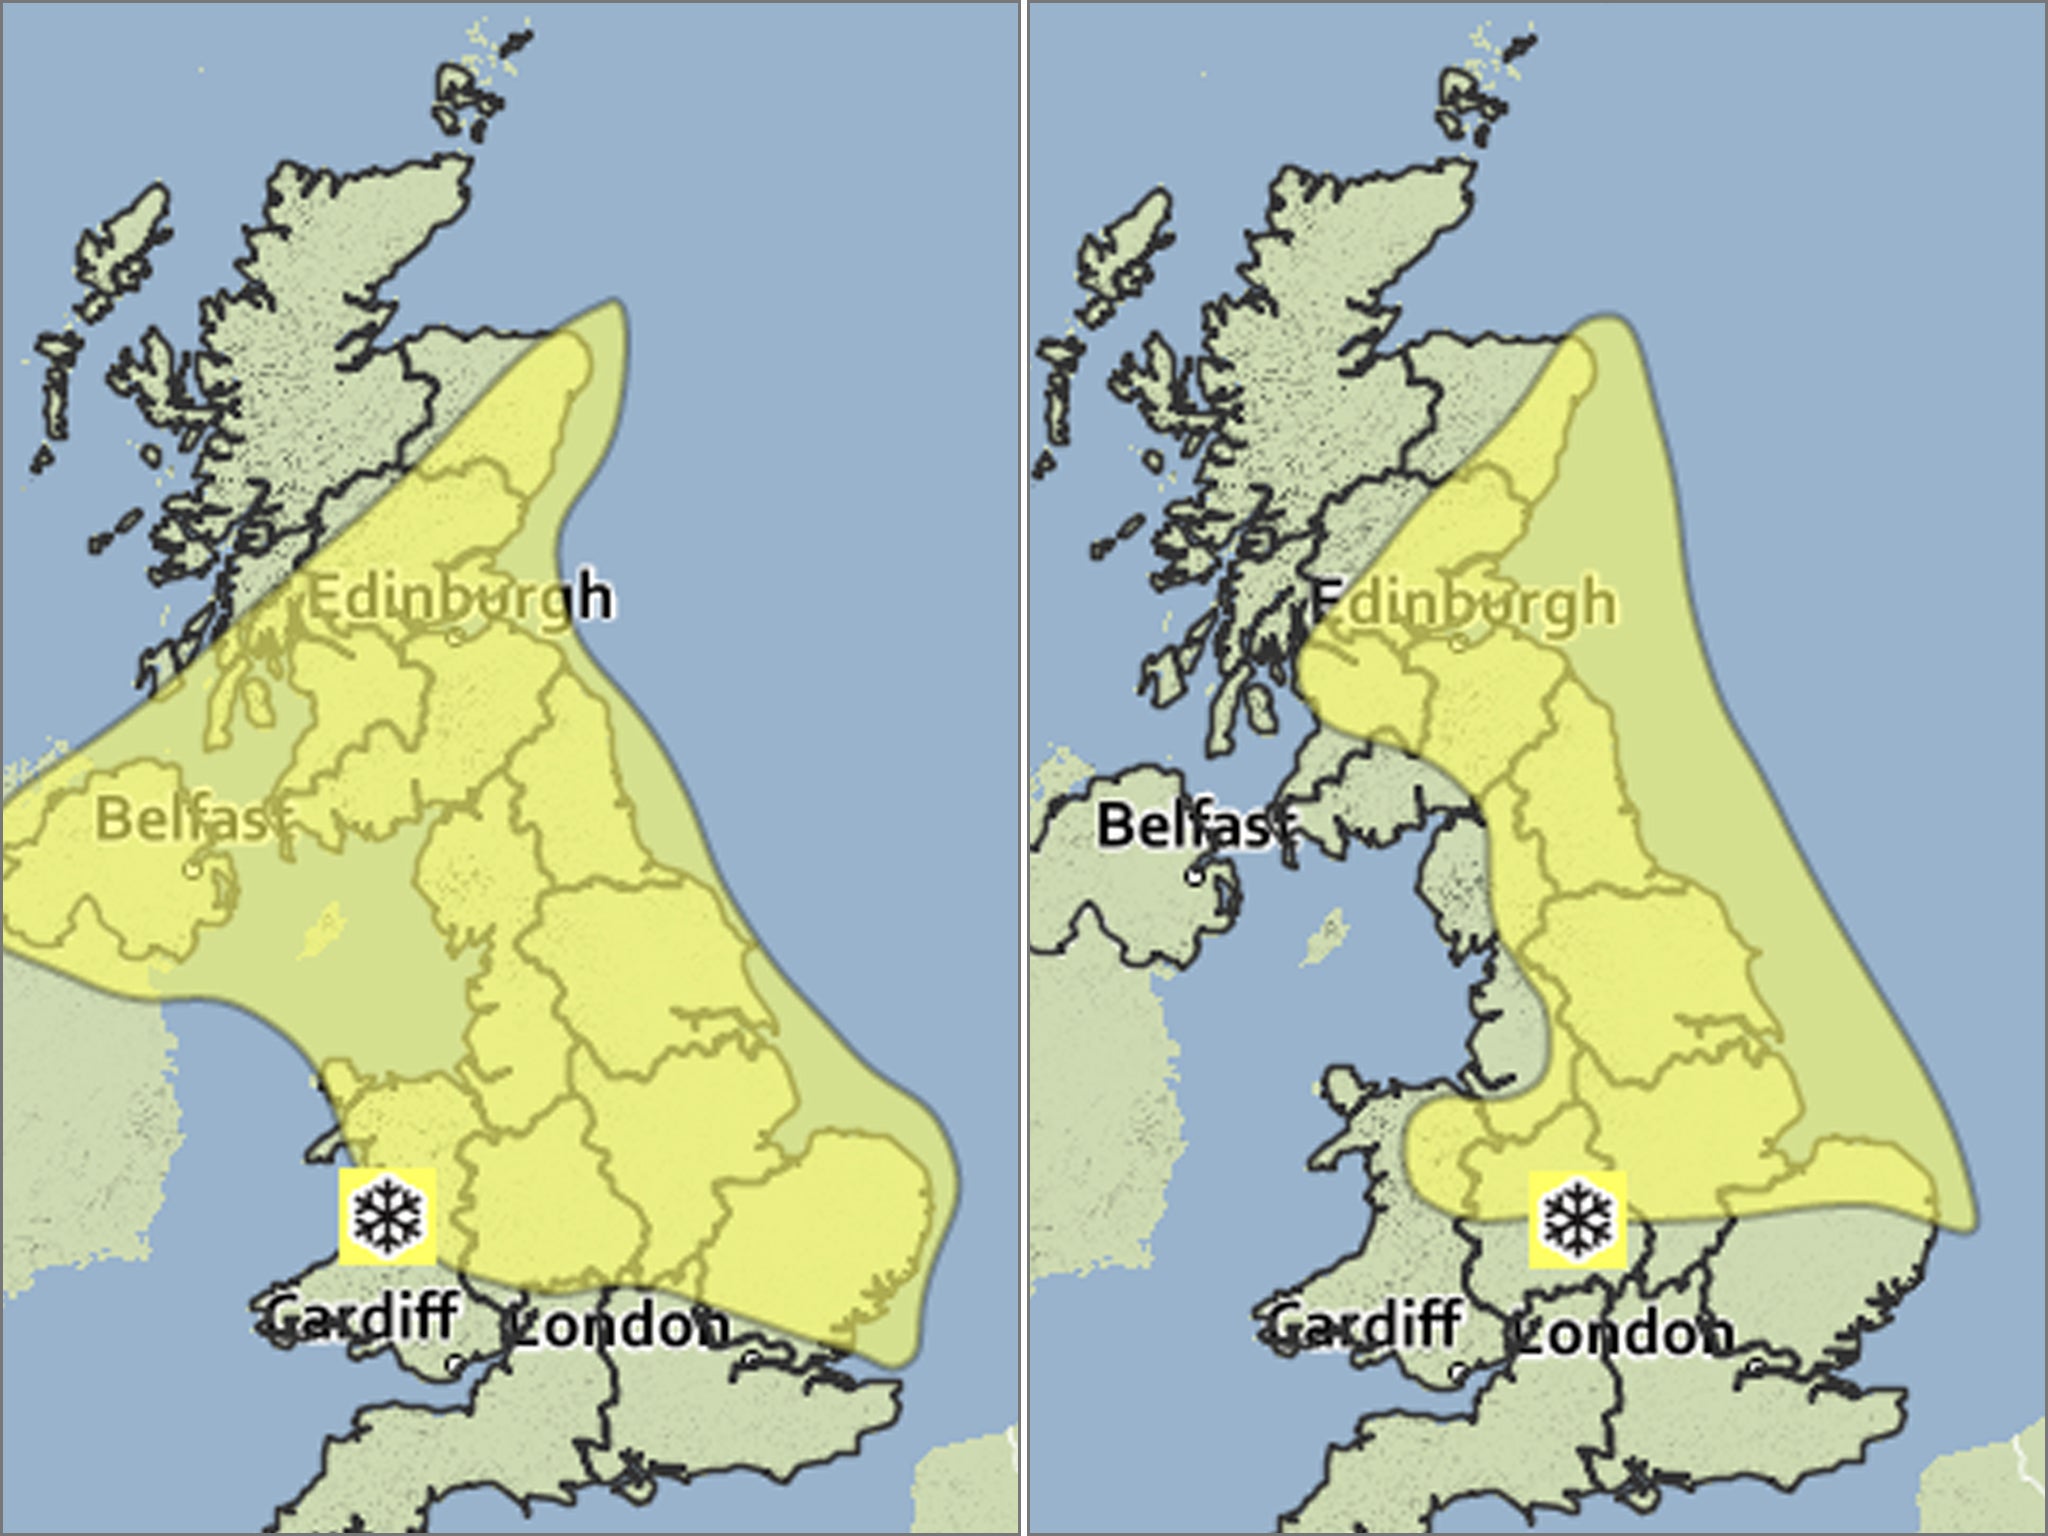 Excerpts from the Met Office maps showing yellow snow alerts fro Saturday (left) and Sunday